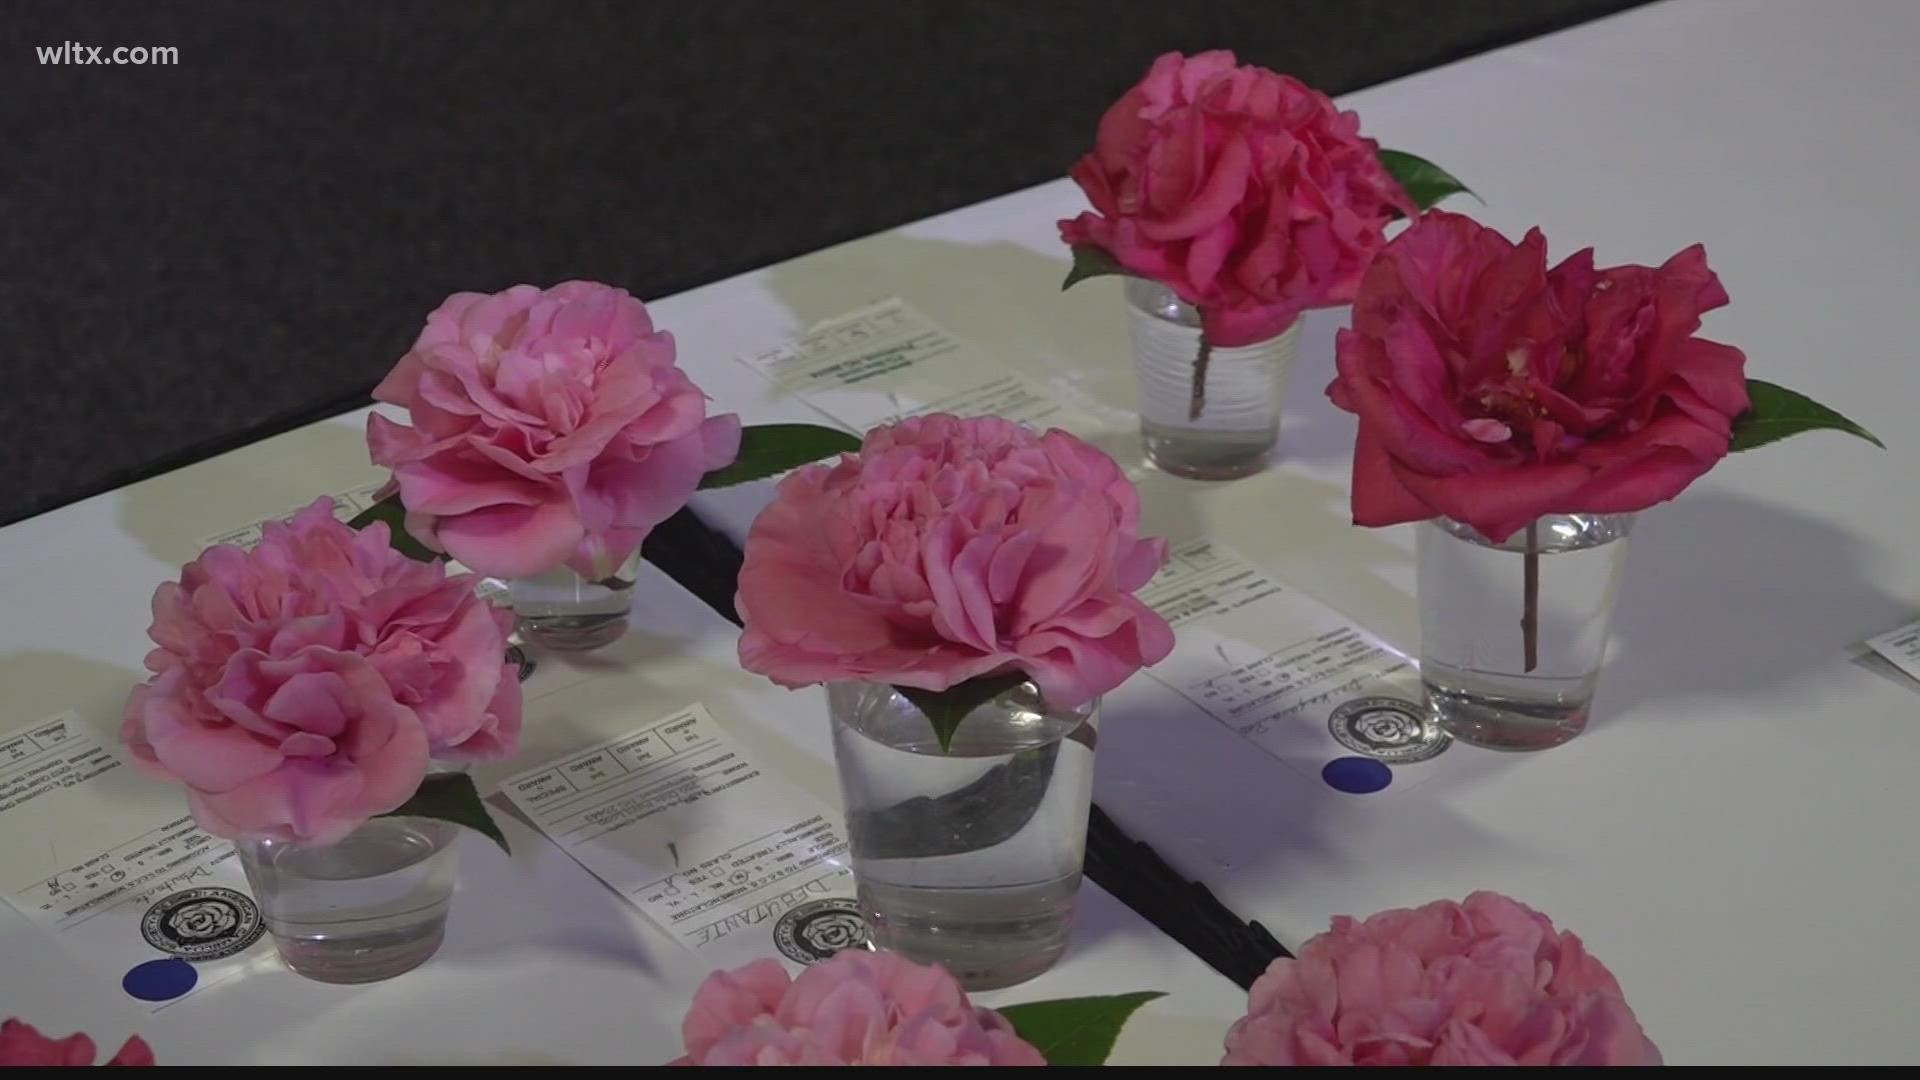 Forty people from SC, Georgia and NC are vying for the blue ribbons during the Camellia flower competition.